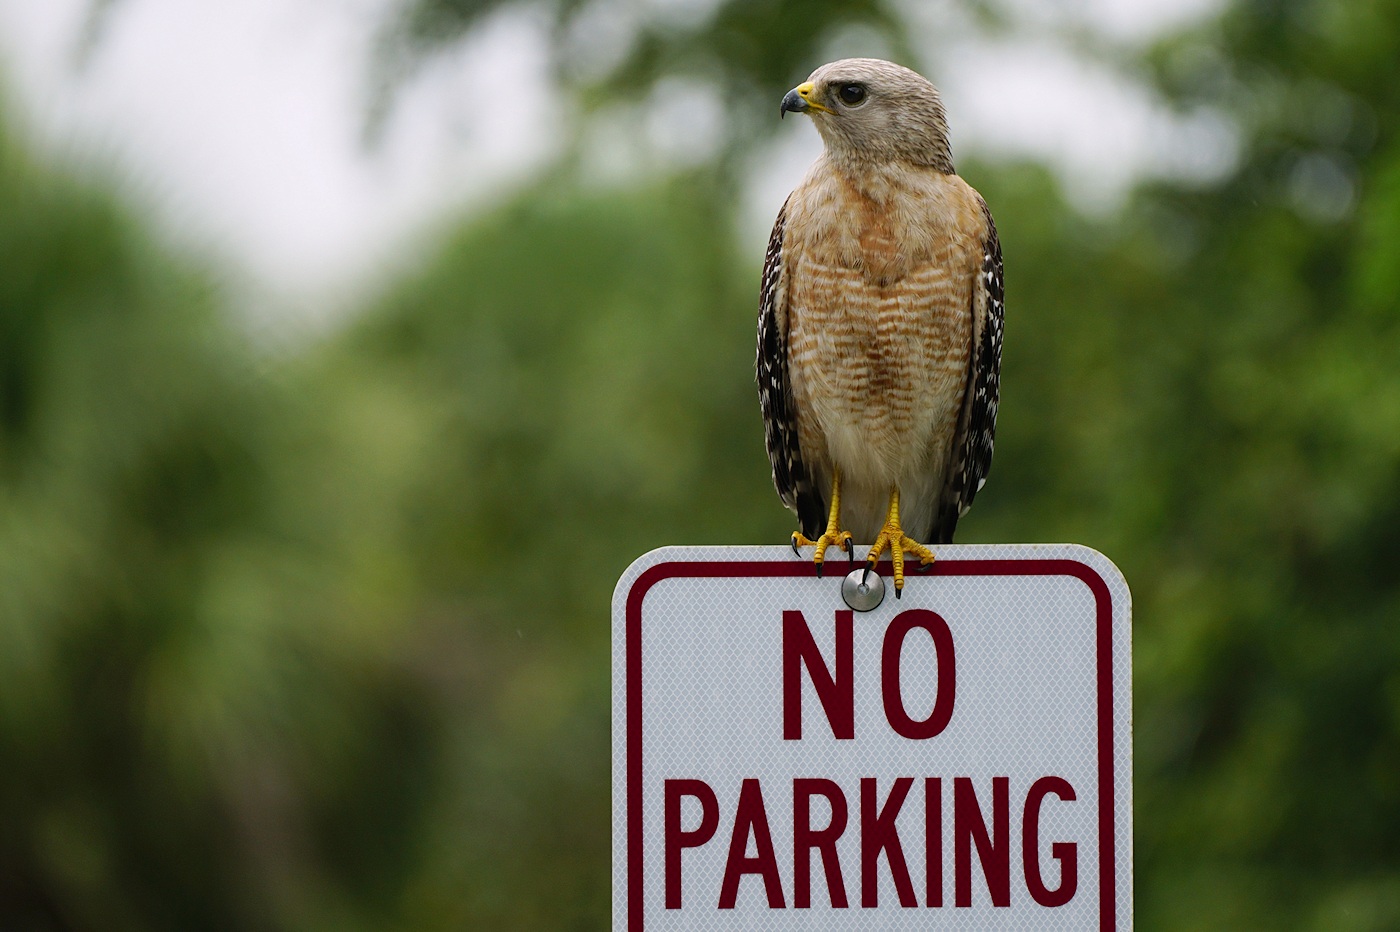 Red-shouldered hawk didnt get the memo